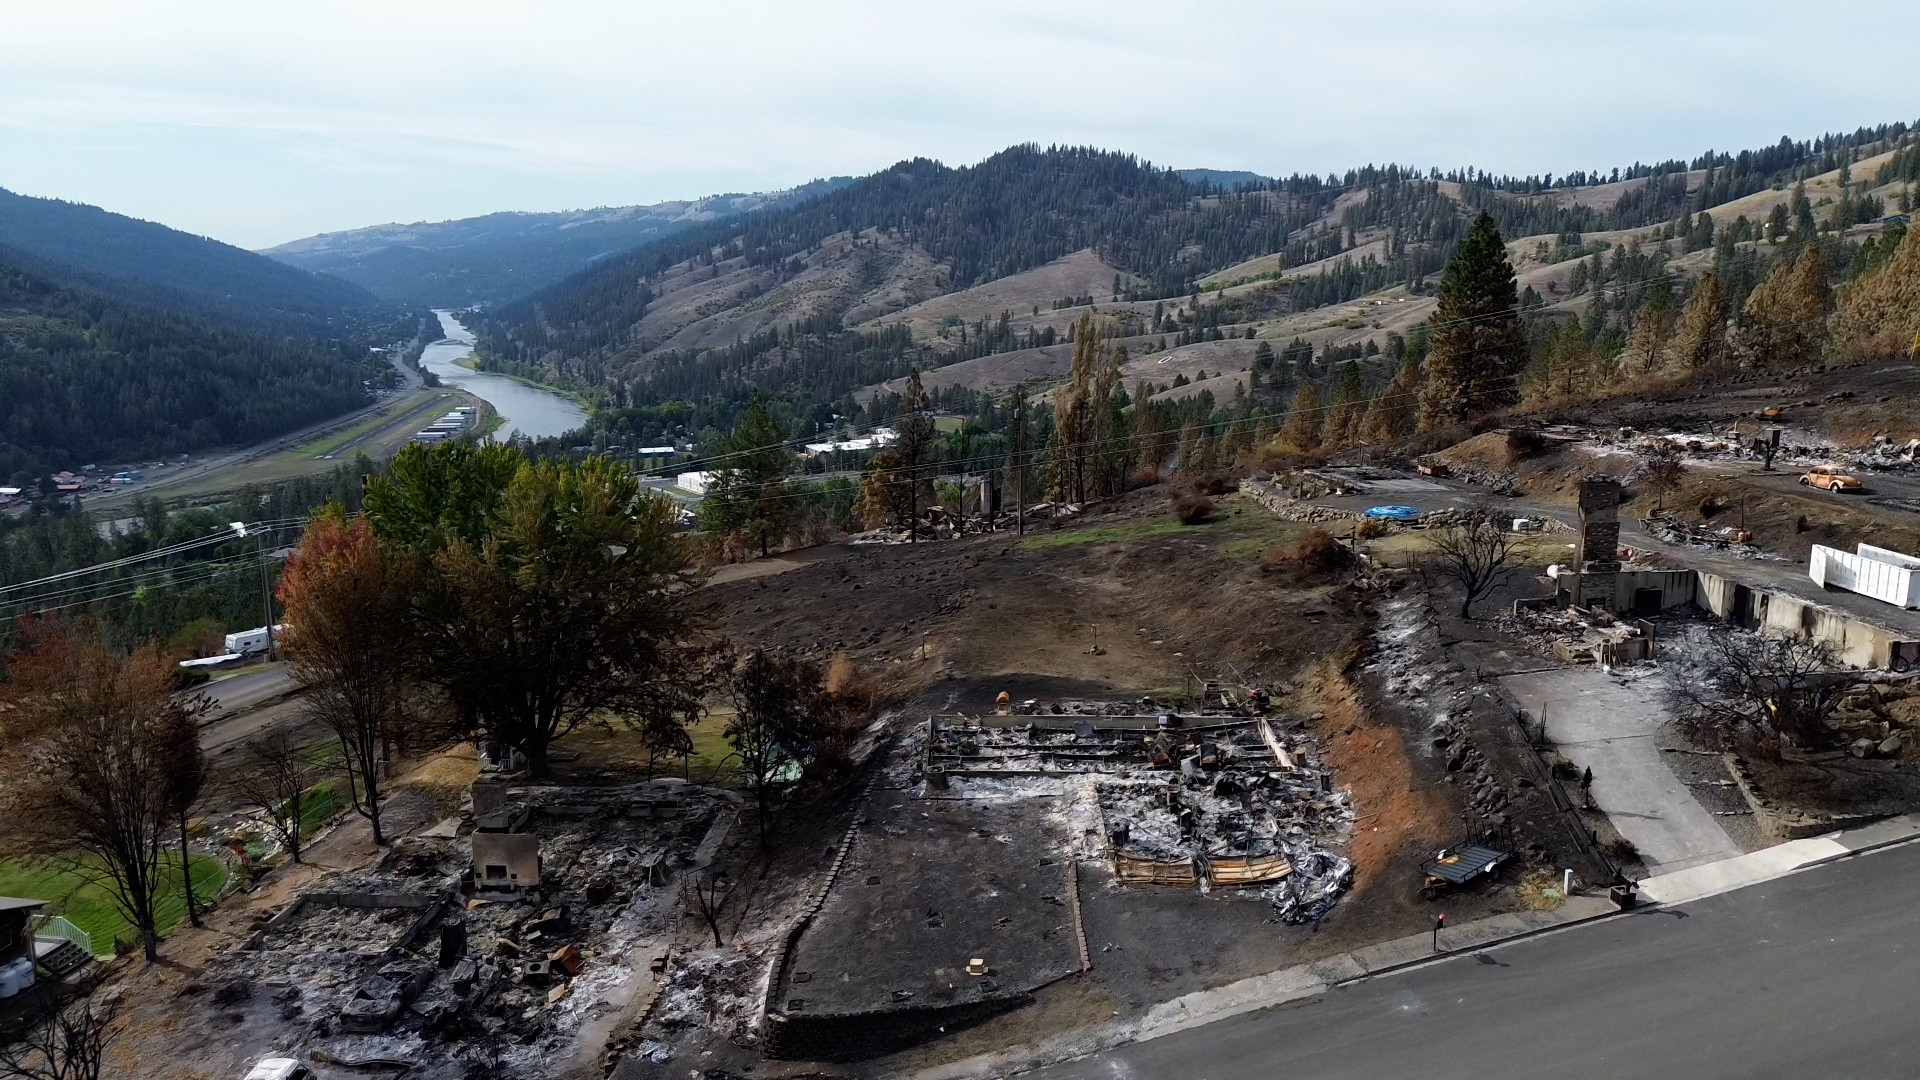 A drone photo shows a bird's eye view of the Wixson Heights neighborhood where several homes have been reduced to a sooty rubble. Tree covered mountains and a river are seen in the distance.